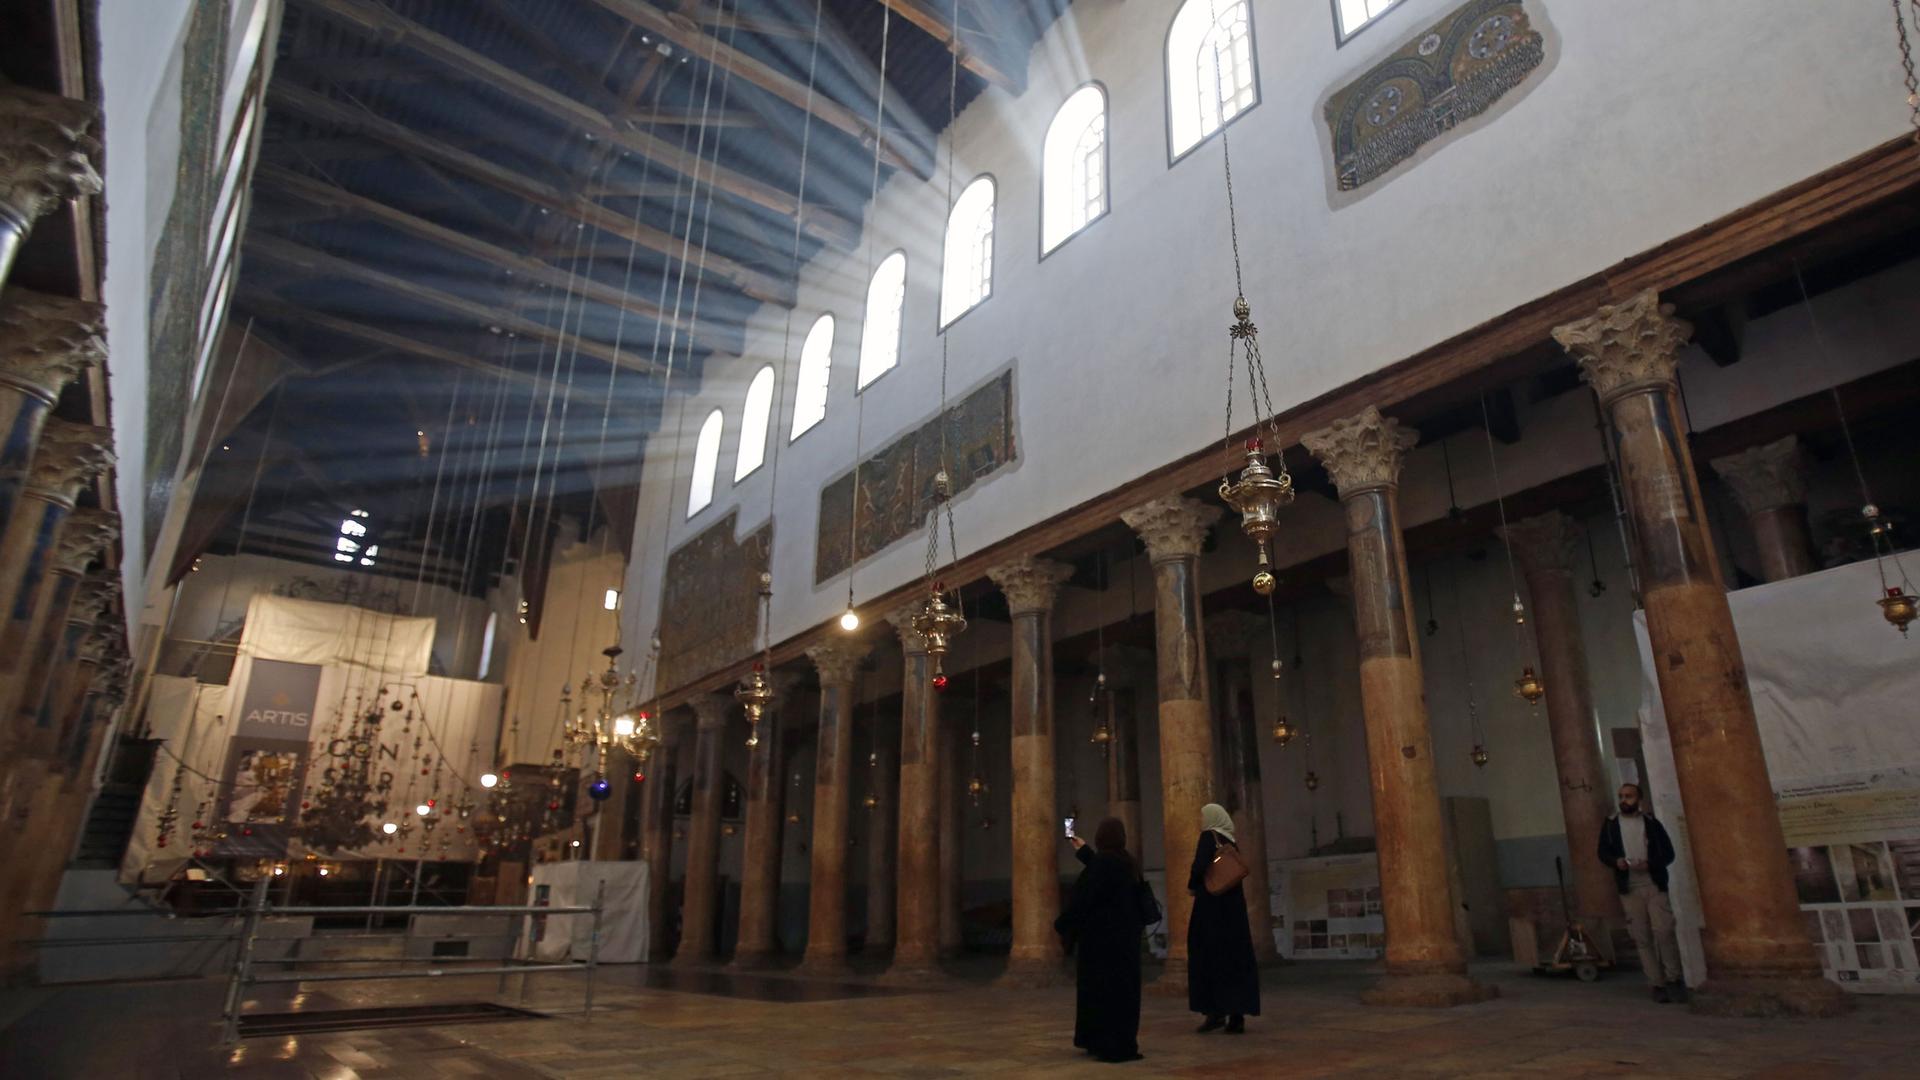 Two visitors are shown standing a one taking a cell phone photo of the Church of the Nativity with bright white light shining from the windows above.